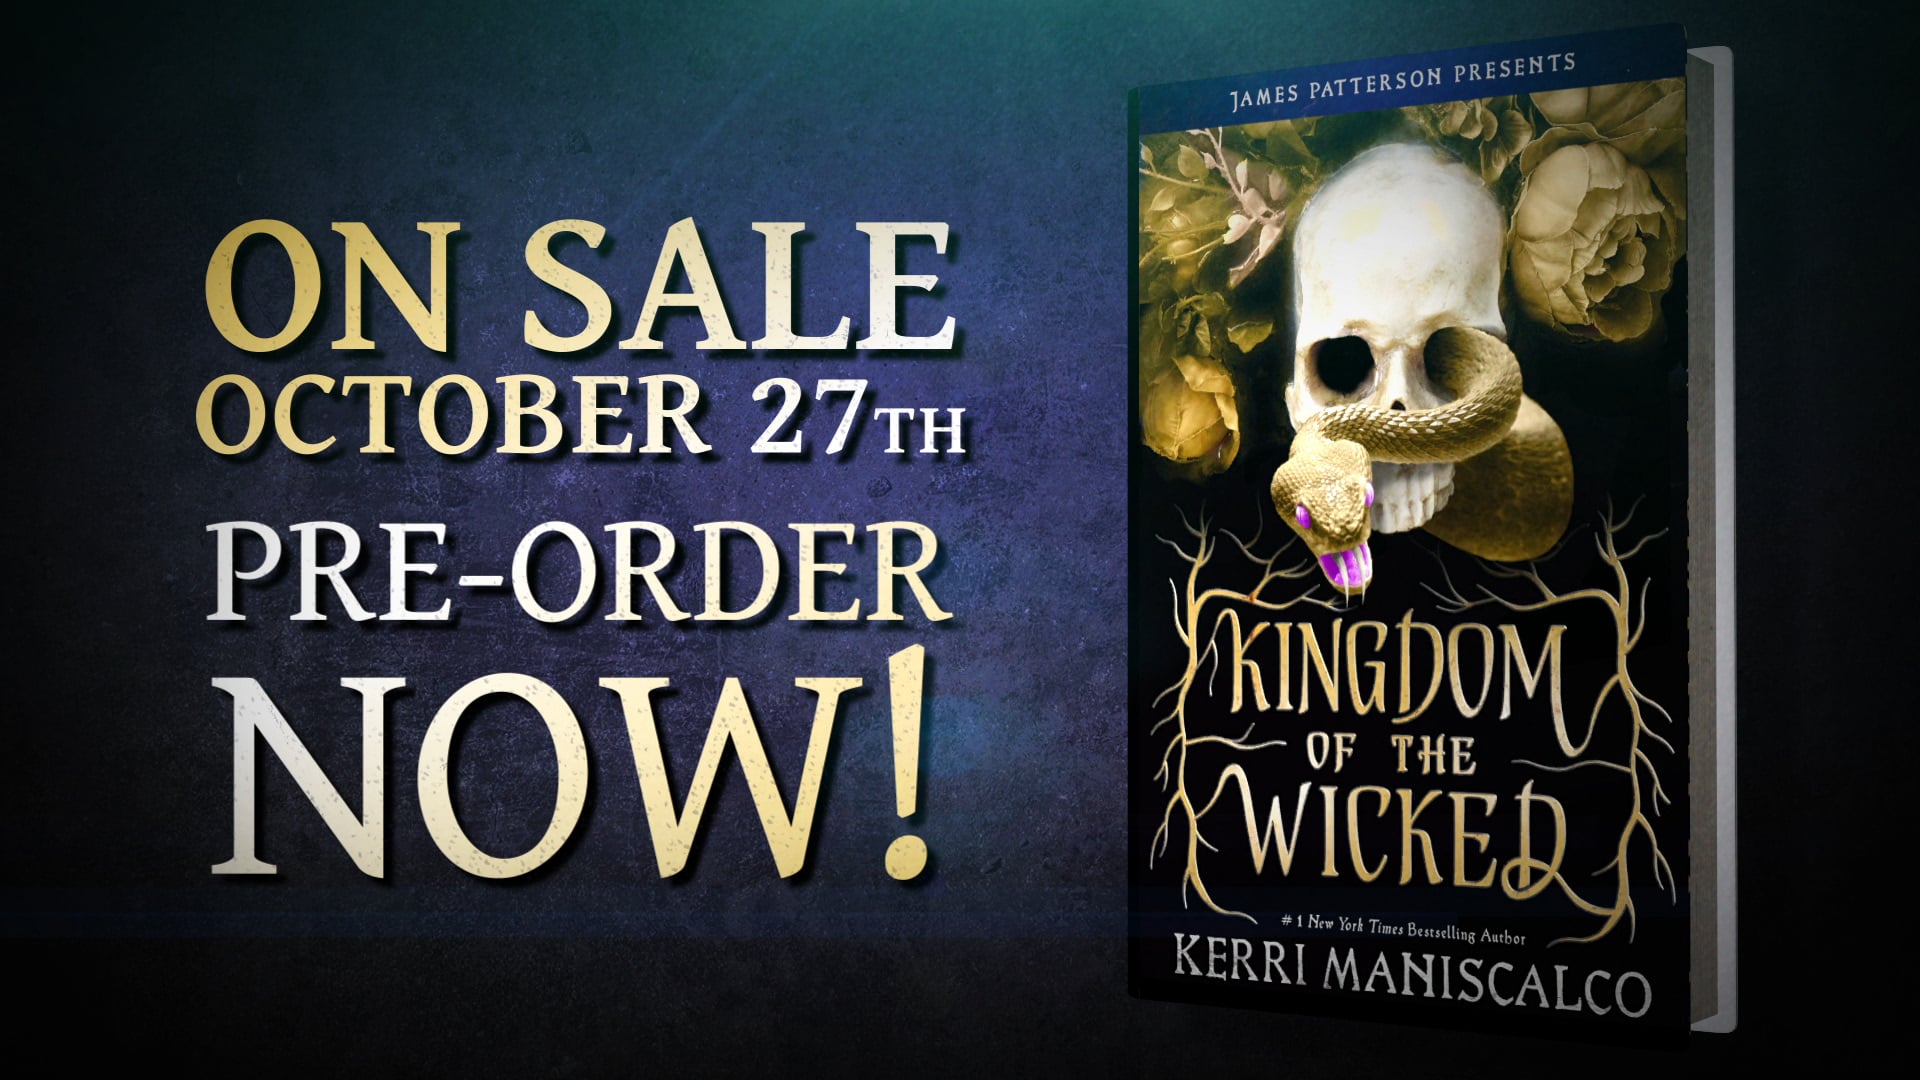 A book cover and book promo for Kingdom of the Wicked